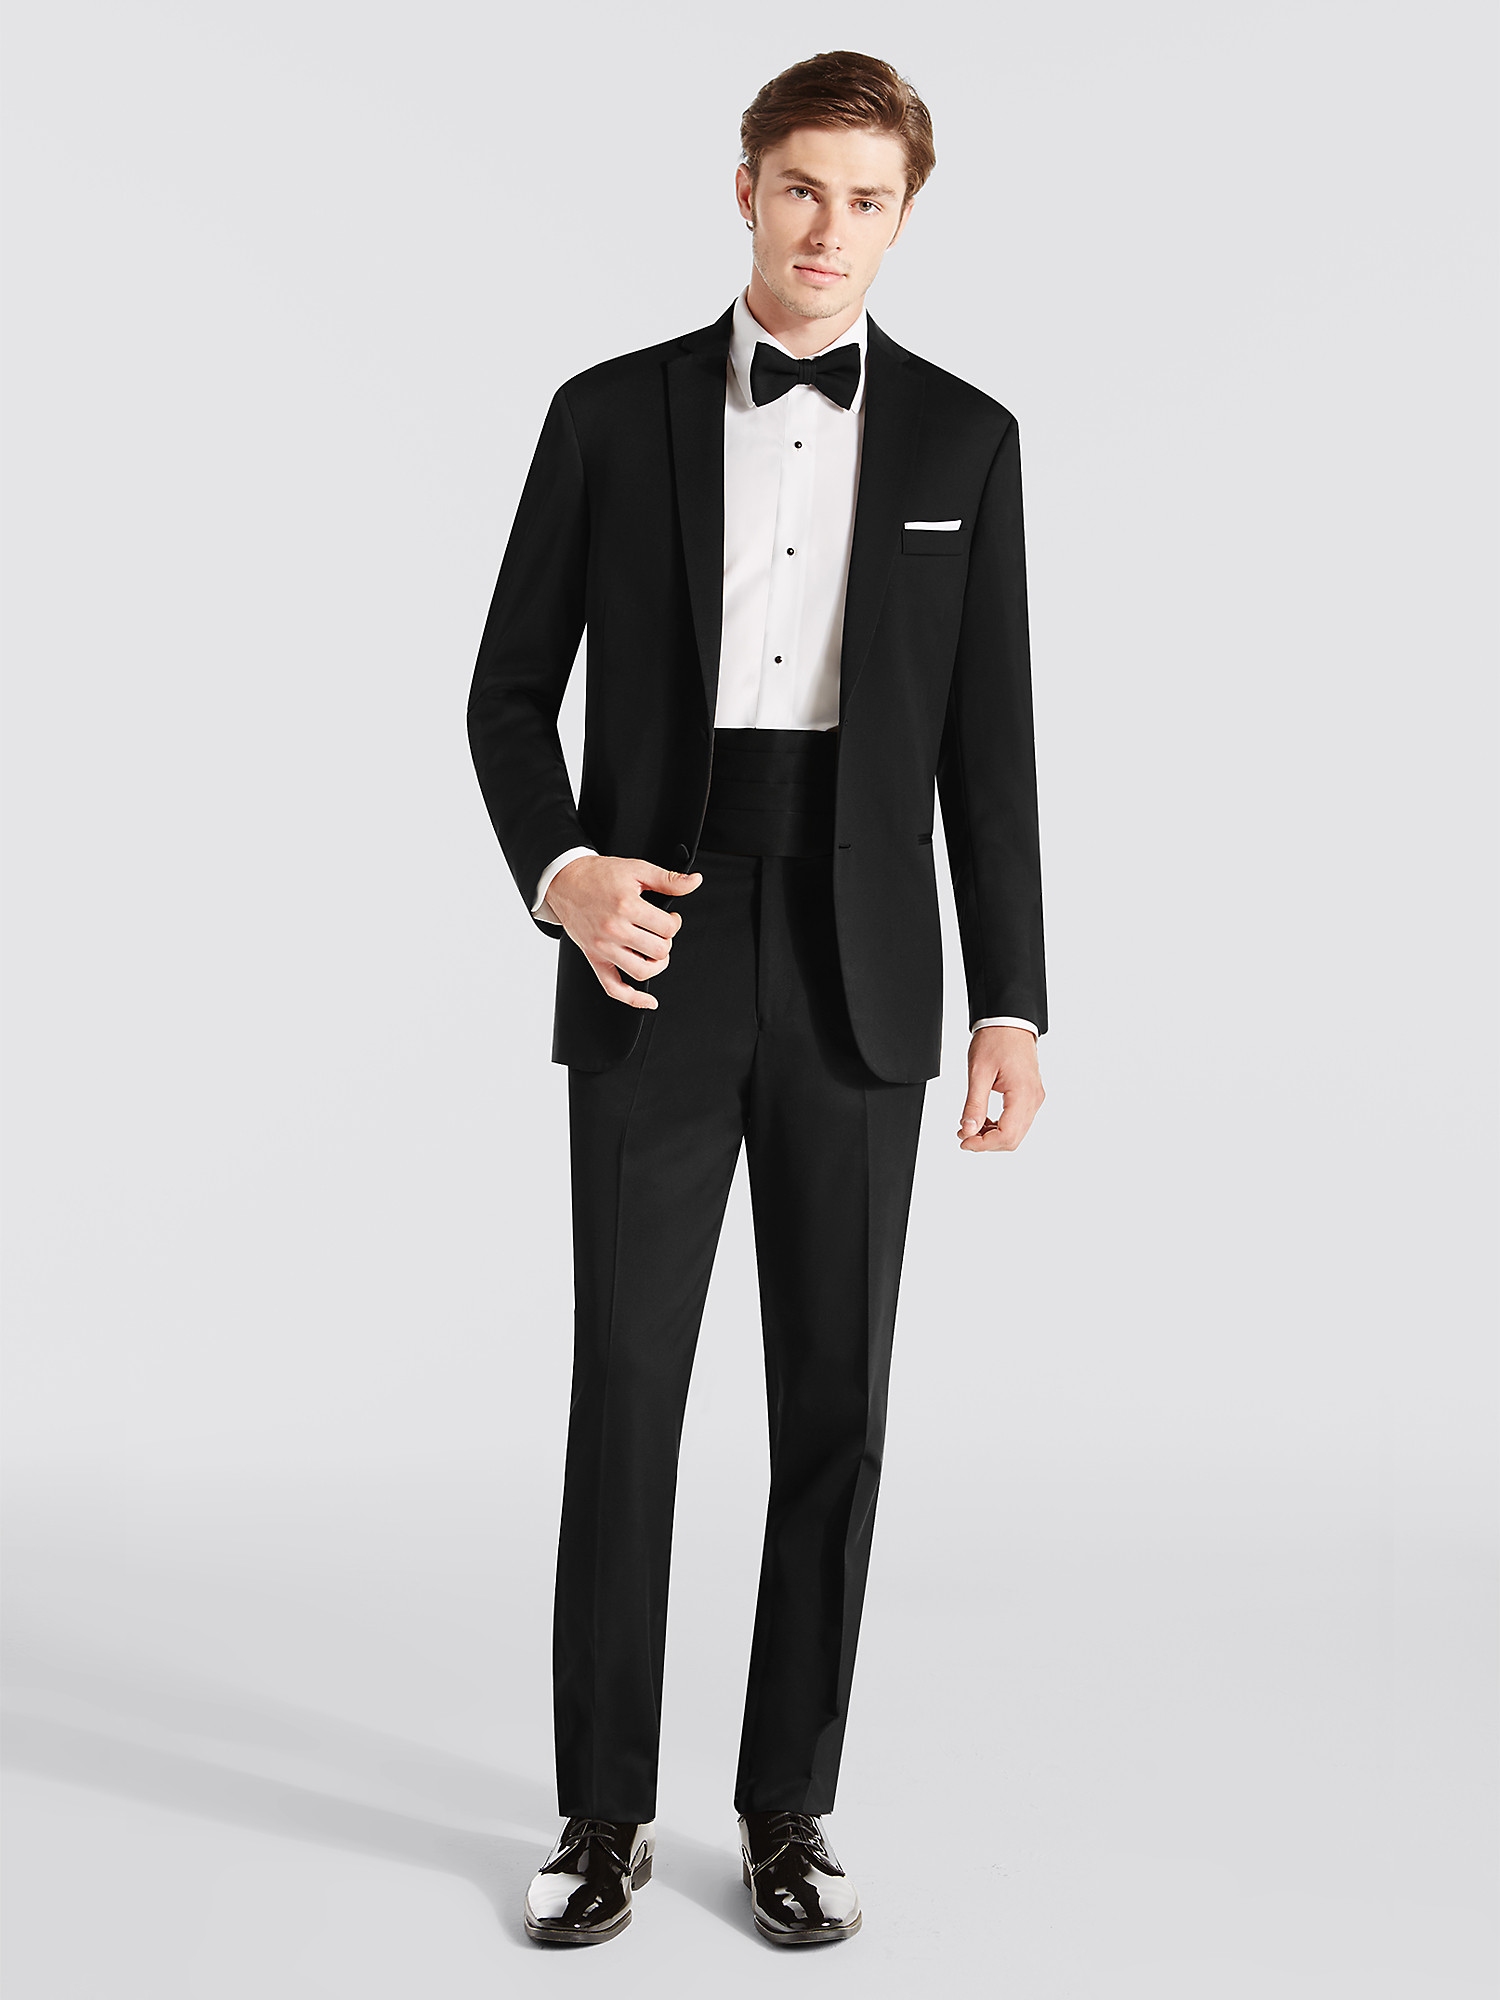 Steal the limelight with a black tuxedo